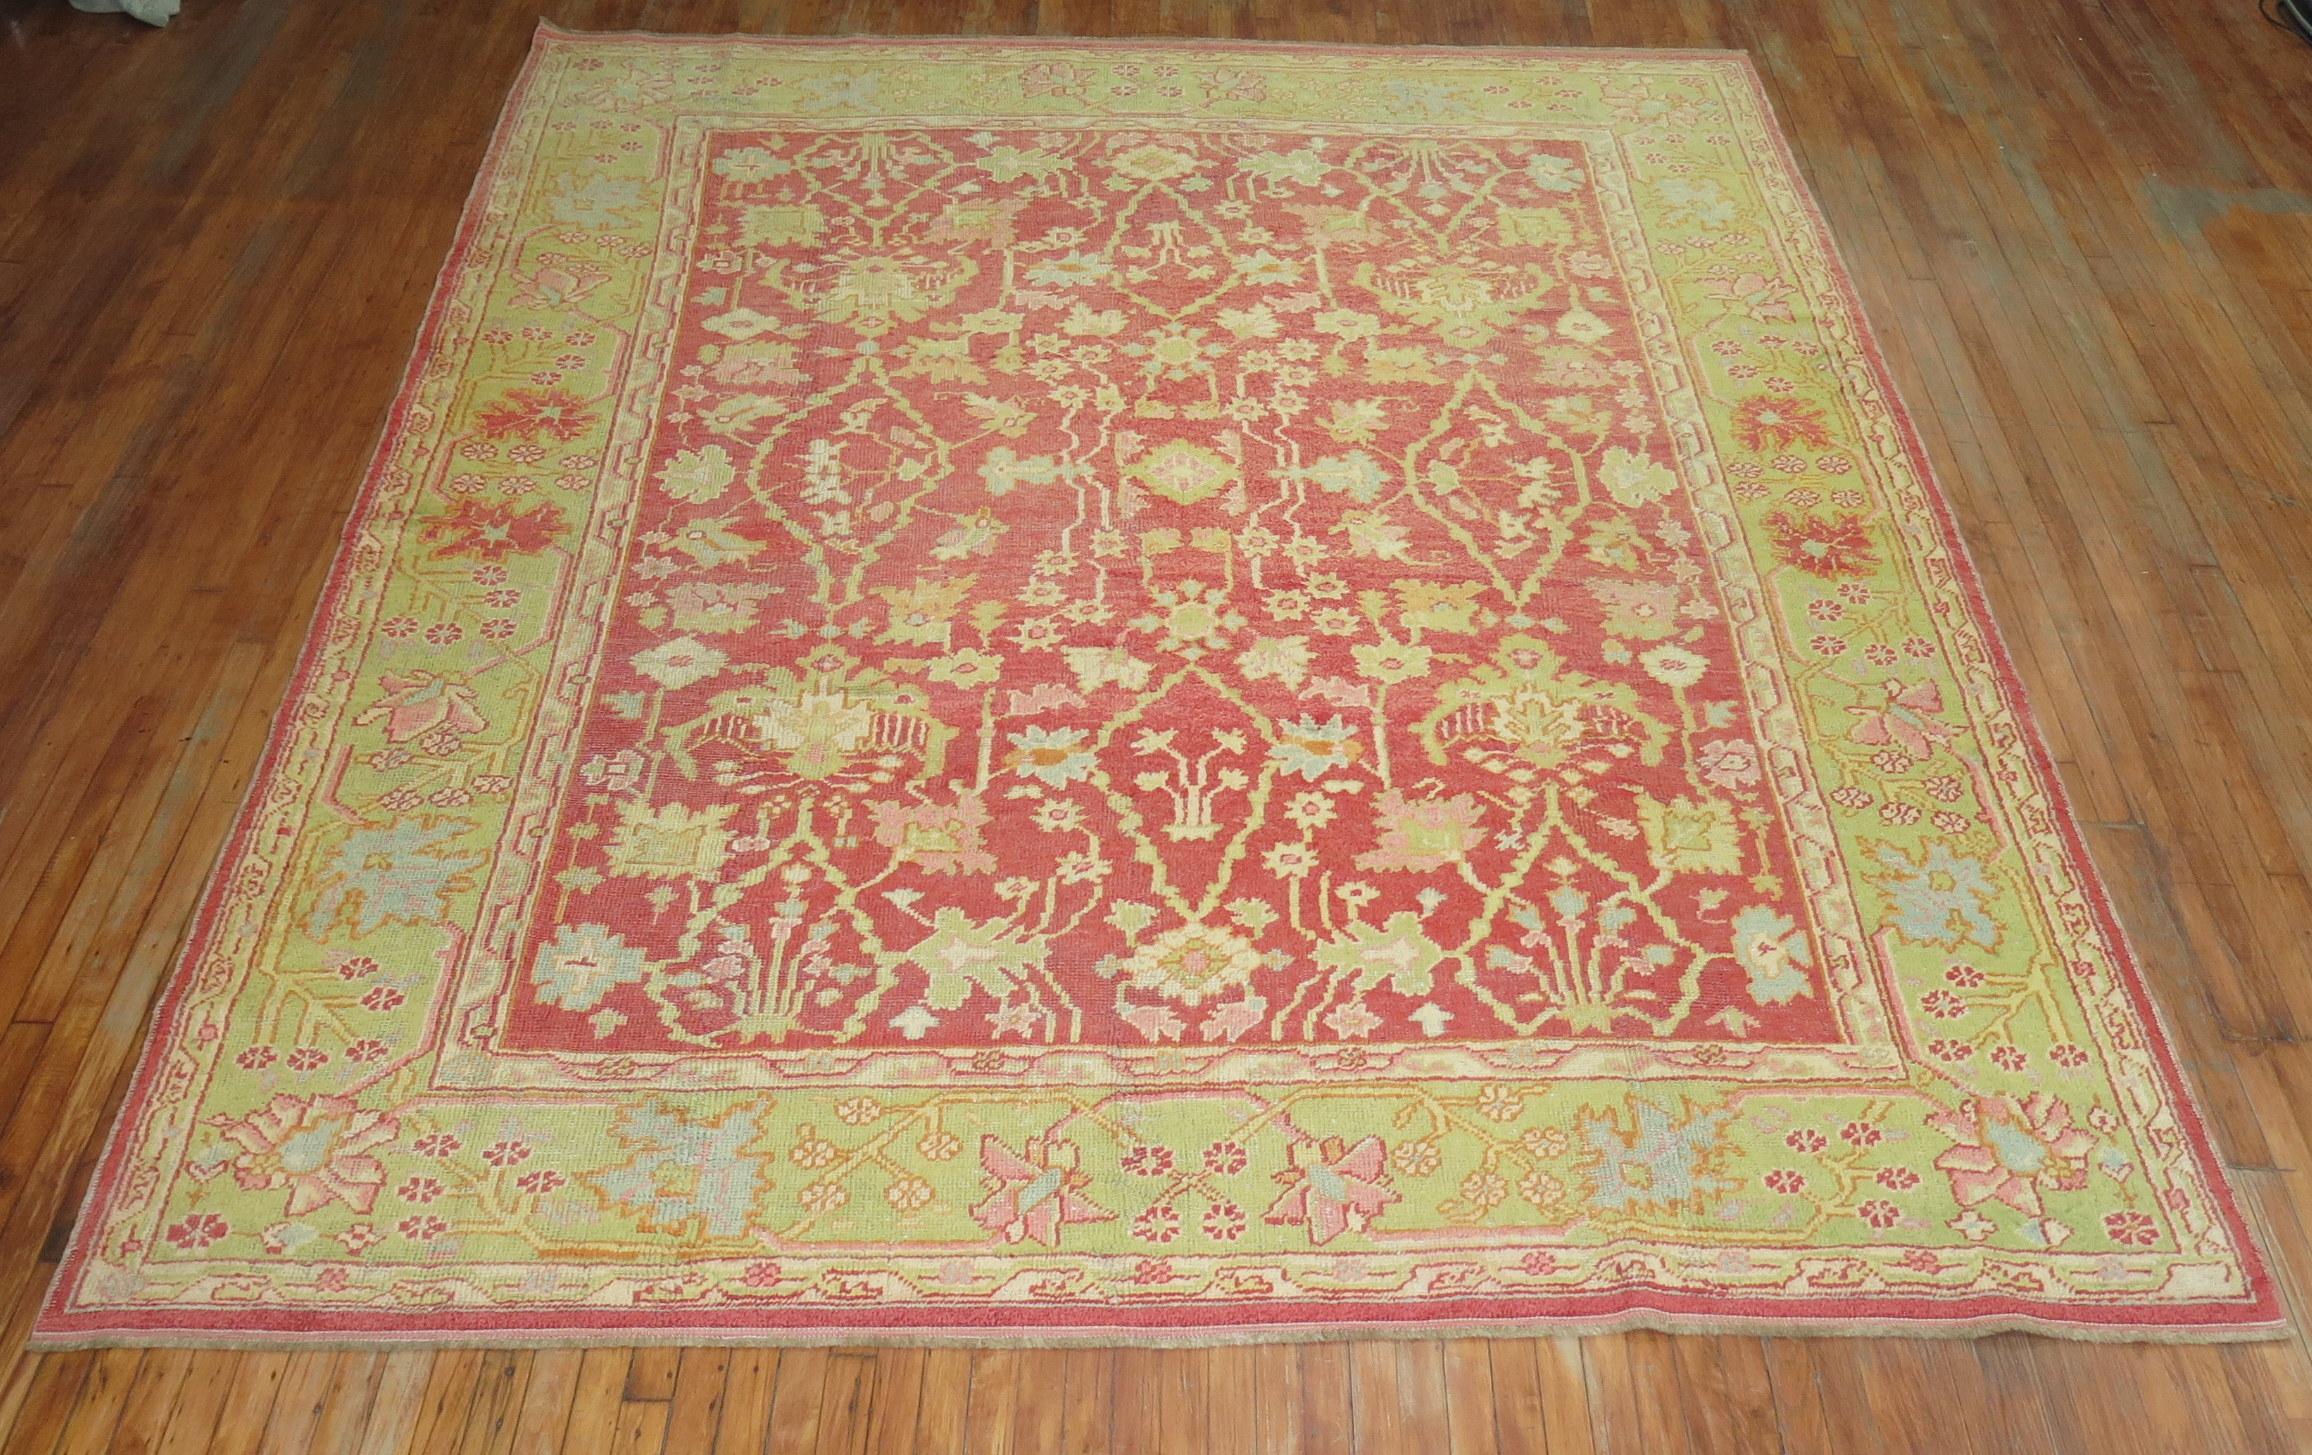 An early 20th century colorful Oushak rug. 

Oushak rugs are prized for their rich looks as well as for their high quality and exceptional beauty, which makes them excellent decorative pieces and in high demand all over the world.